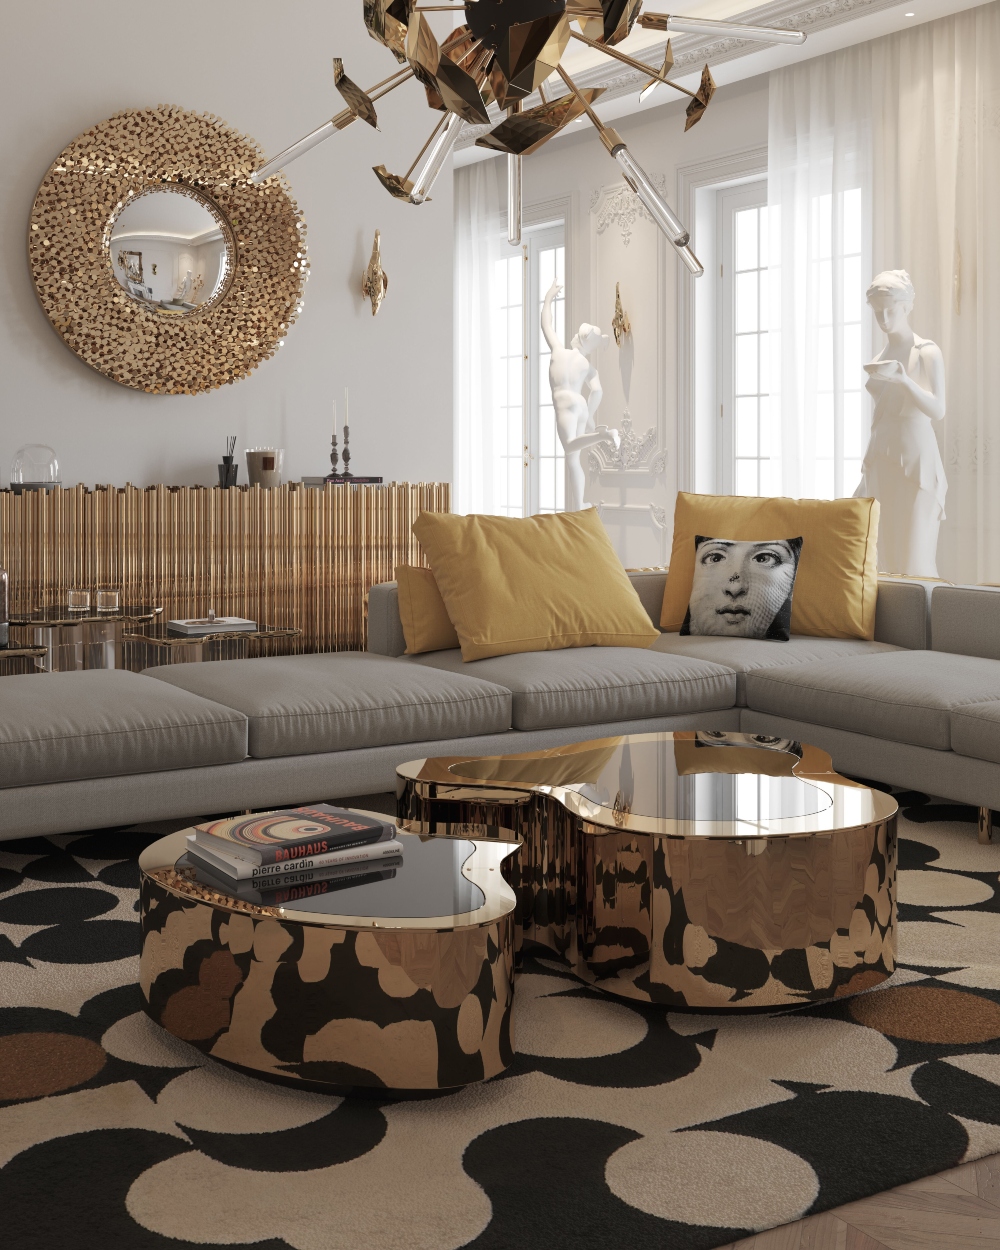 Home decorations with gorgeous rugs by Olivia Erwin Interiors